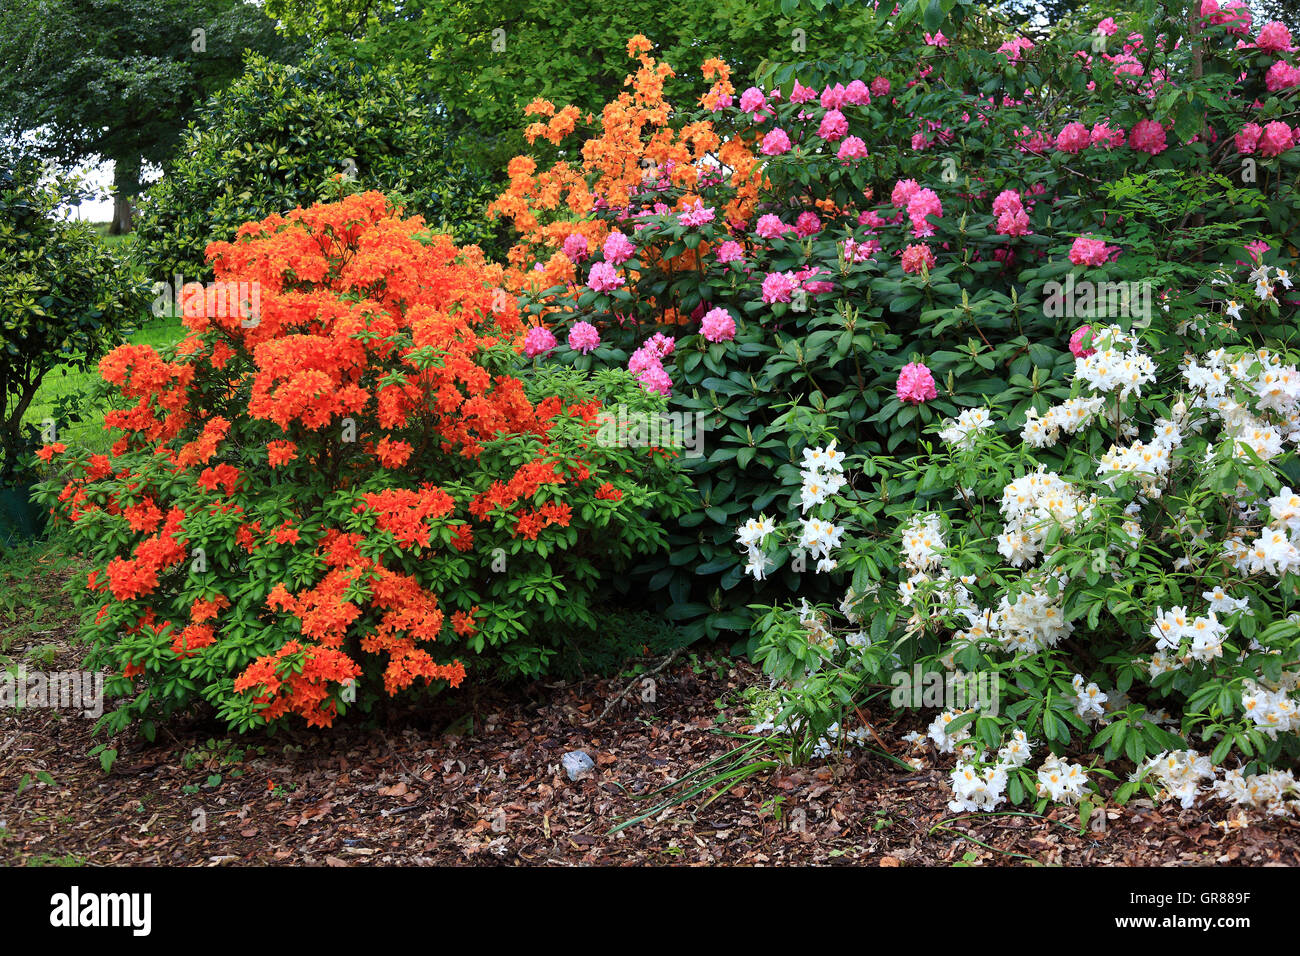 Rhododendrons, rhododendron, plant type from the family of the heather plants, Ericaceae, rhododendron bushes in different colou Stock Photo